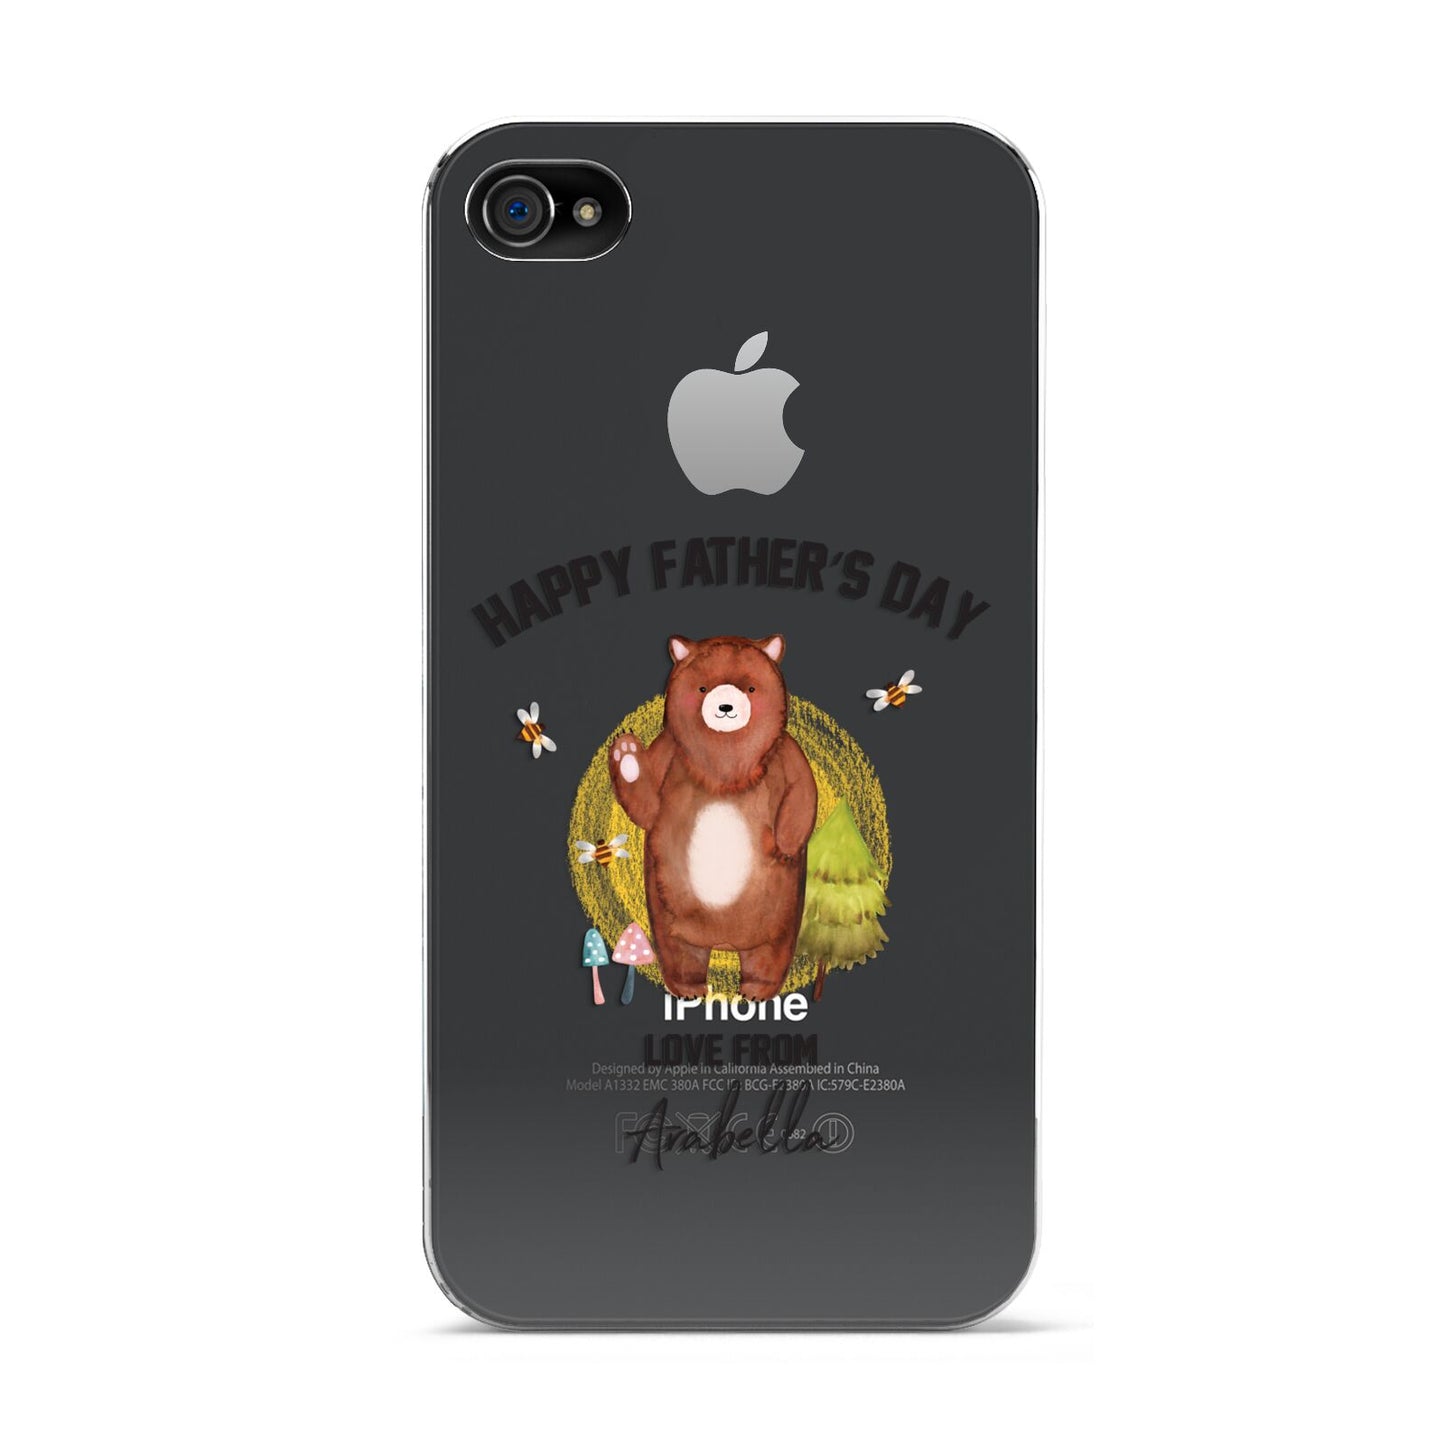 Fathers Day Bear Apple iPhone 4s Case